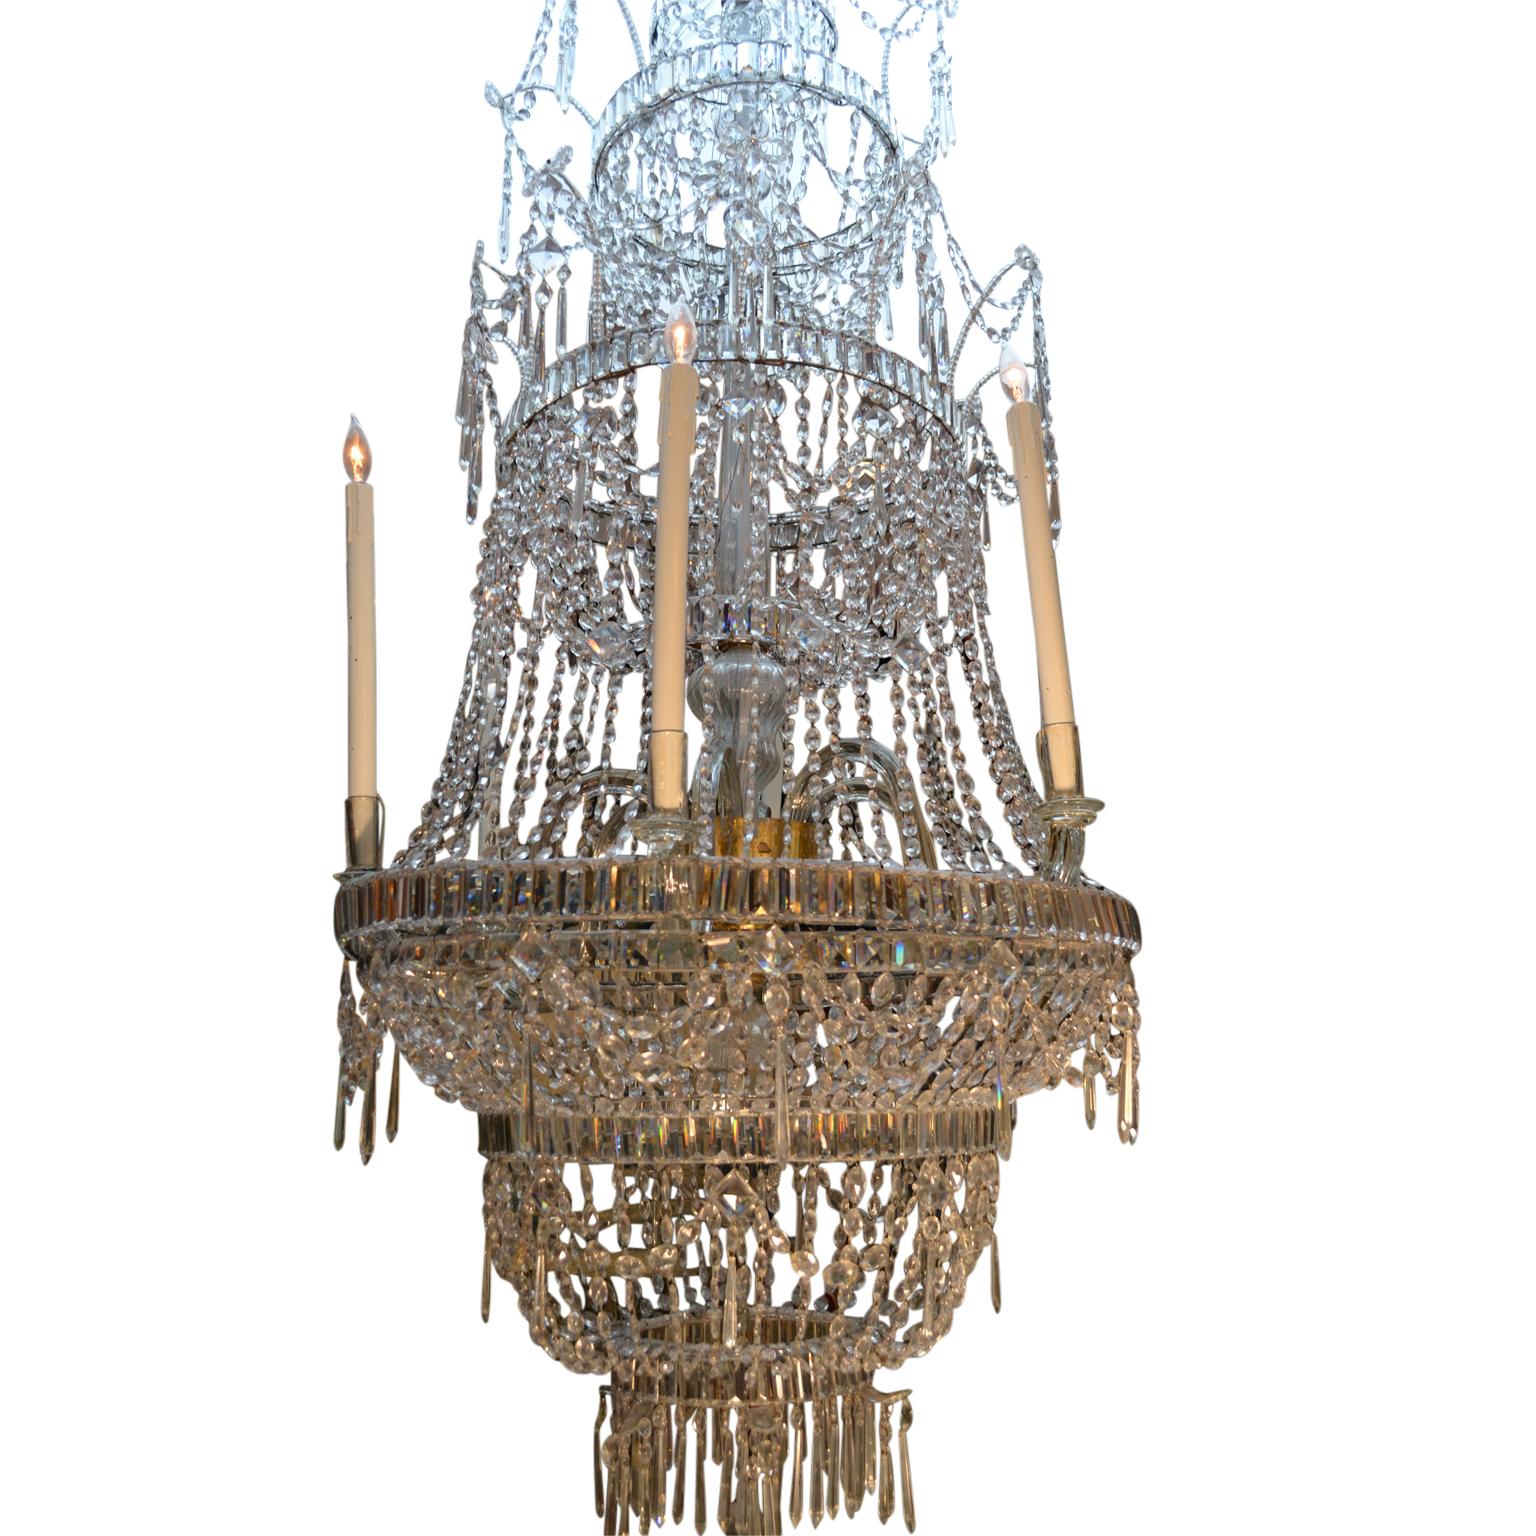 A palatial scale multi-tiered 18th century neoclassical crystal chandelier sourced from the renowned Royal Crystal Manufacturer of La Granja in Spain. This chandelier comes with an incredible story and provenance and was one of about twelve